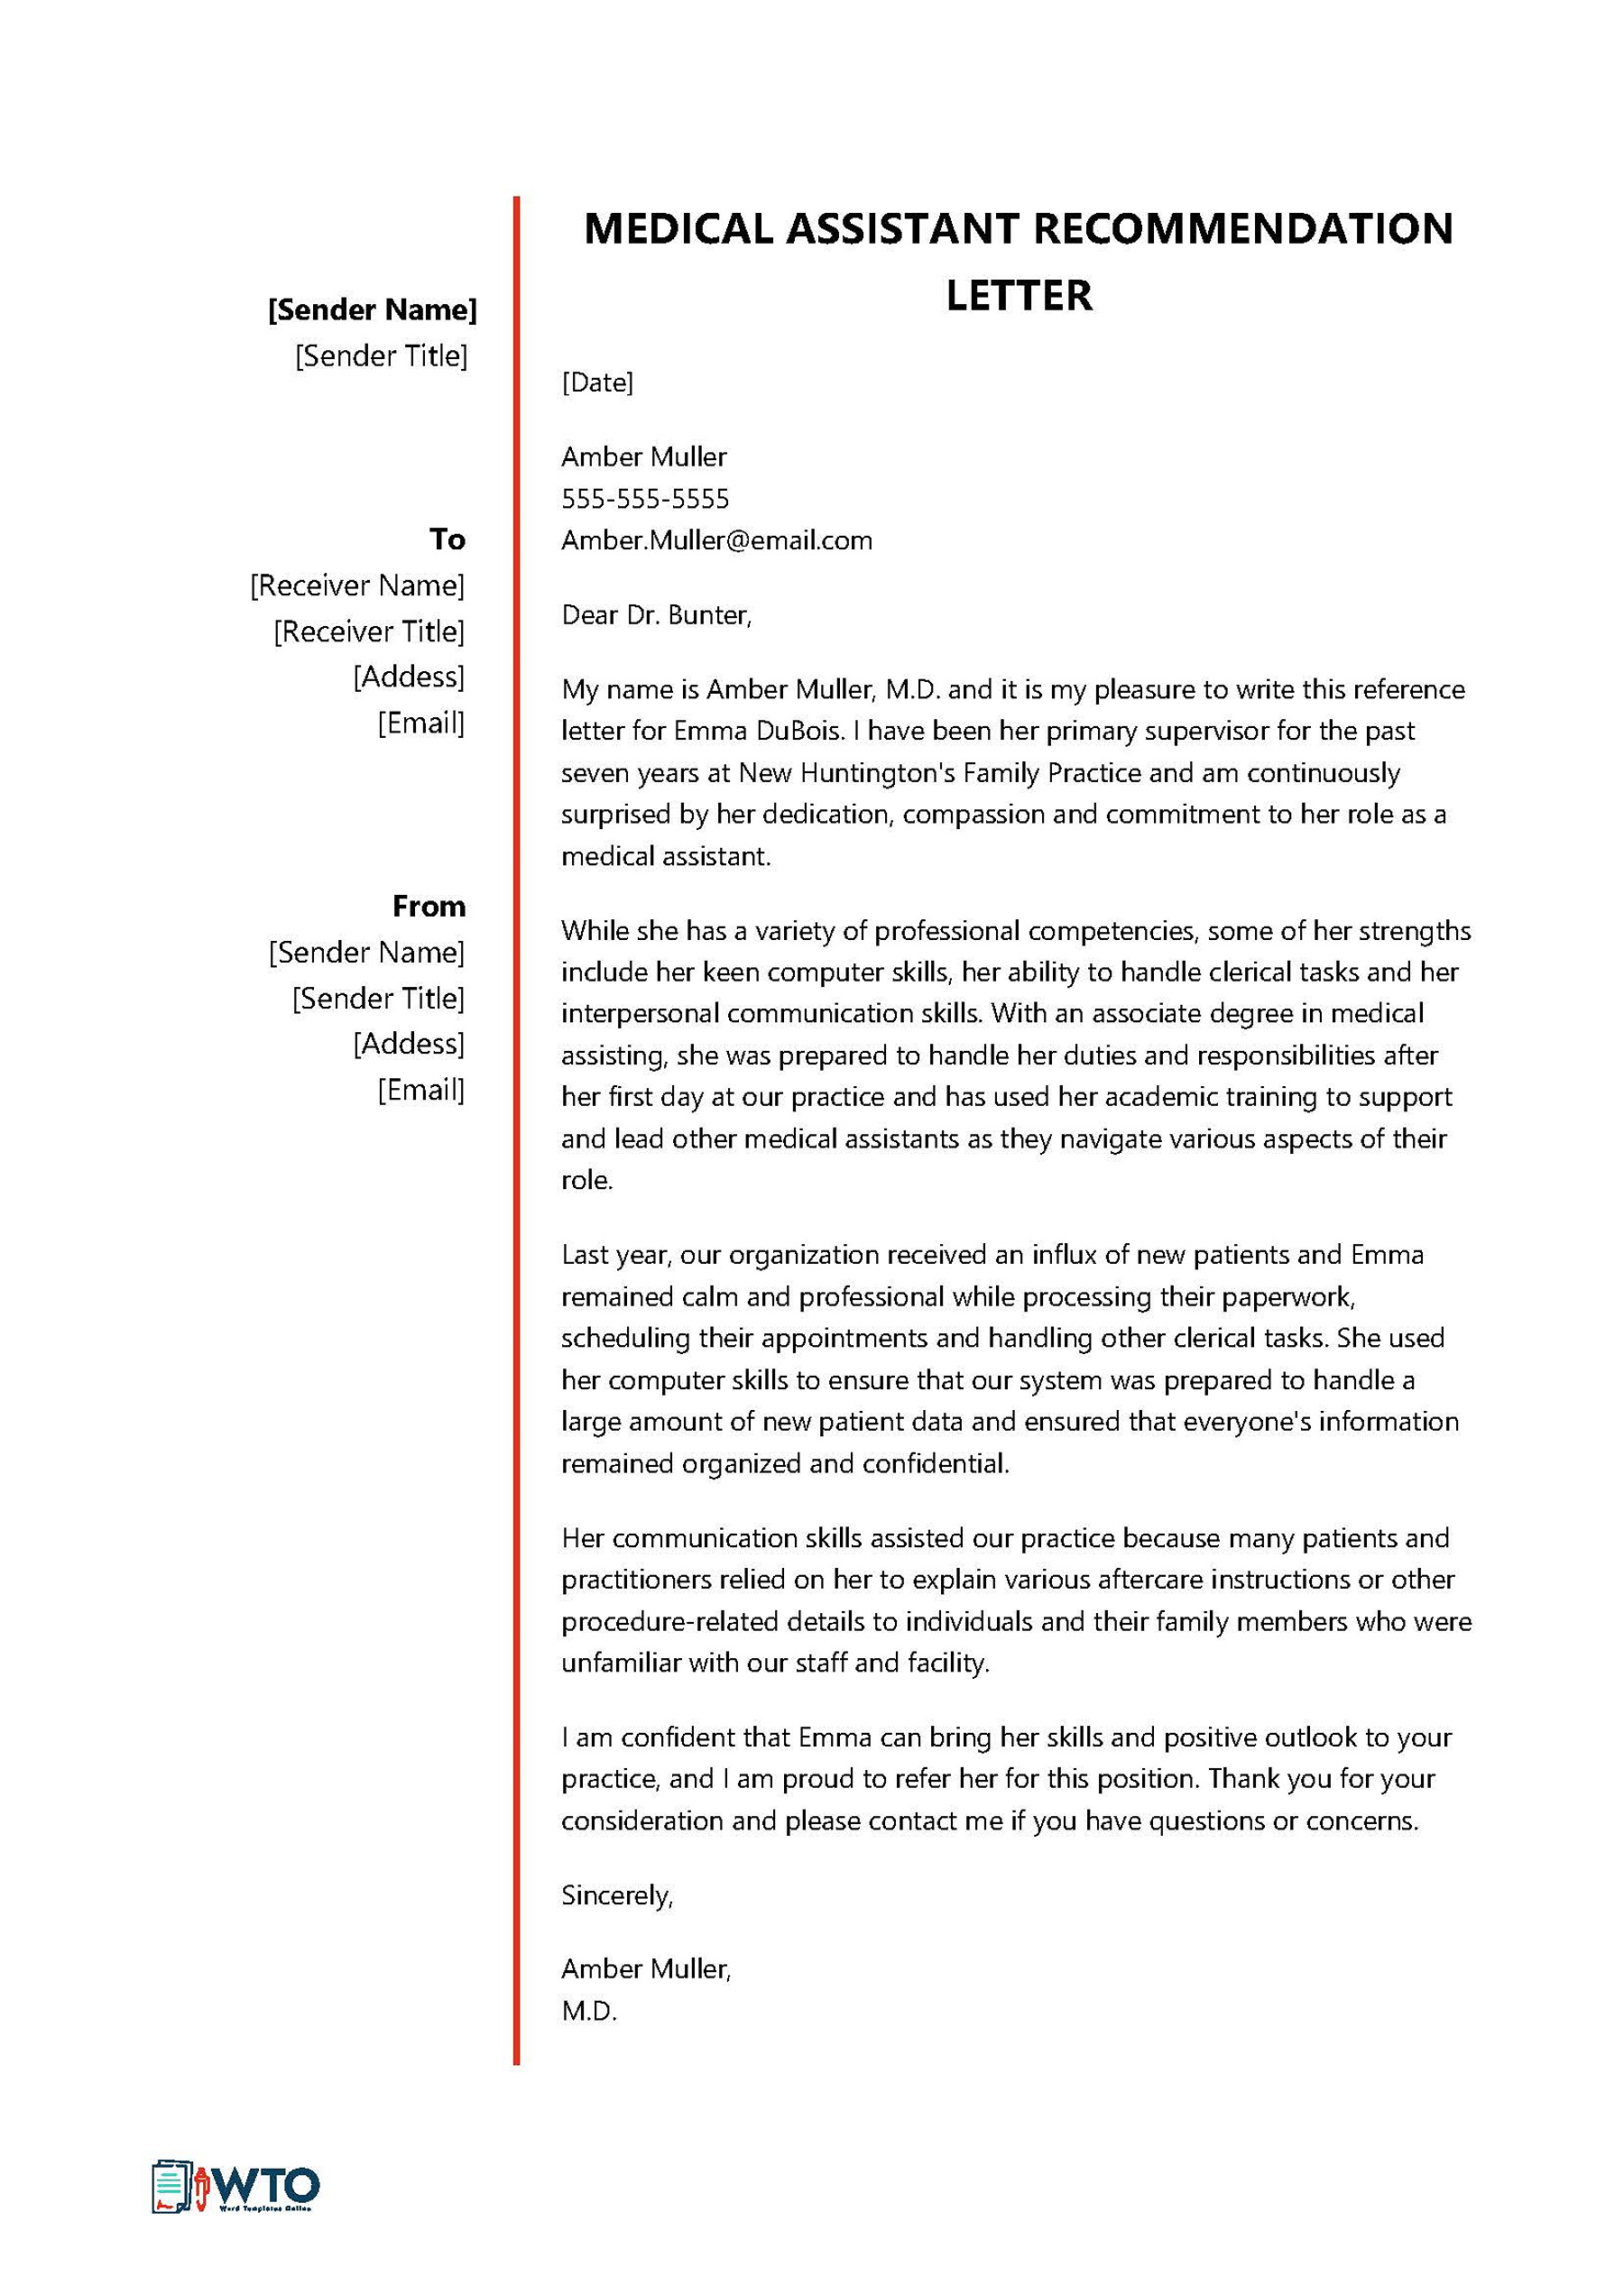 medical Assistant Letter of recommendation Word